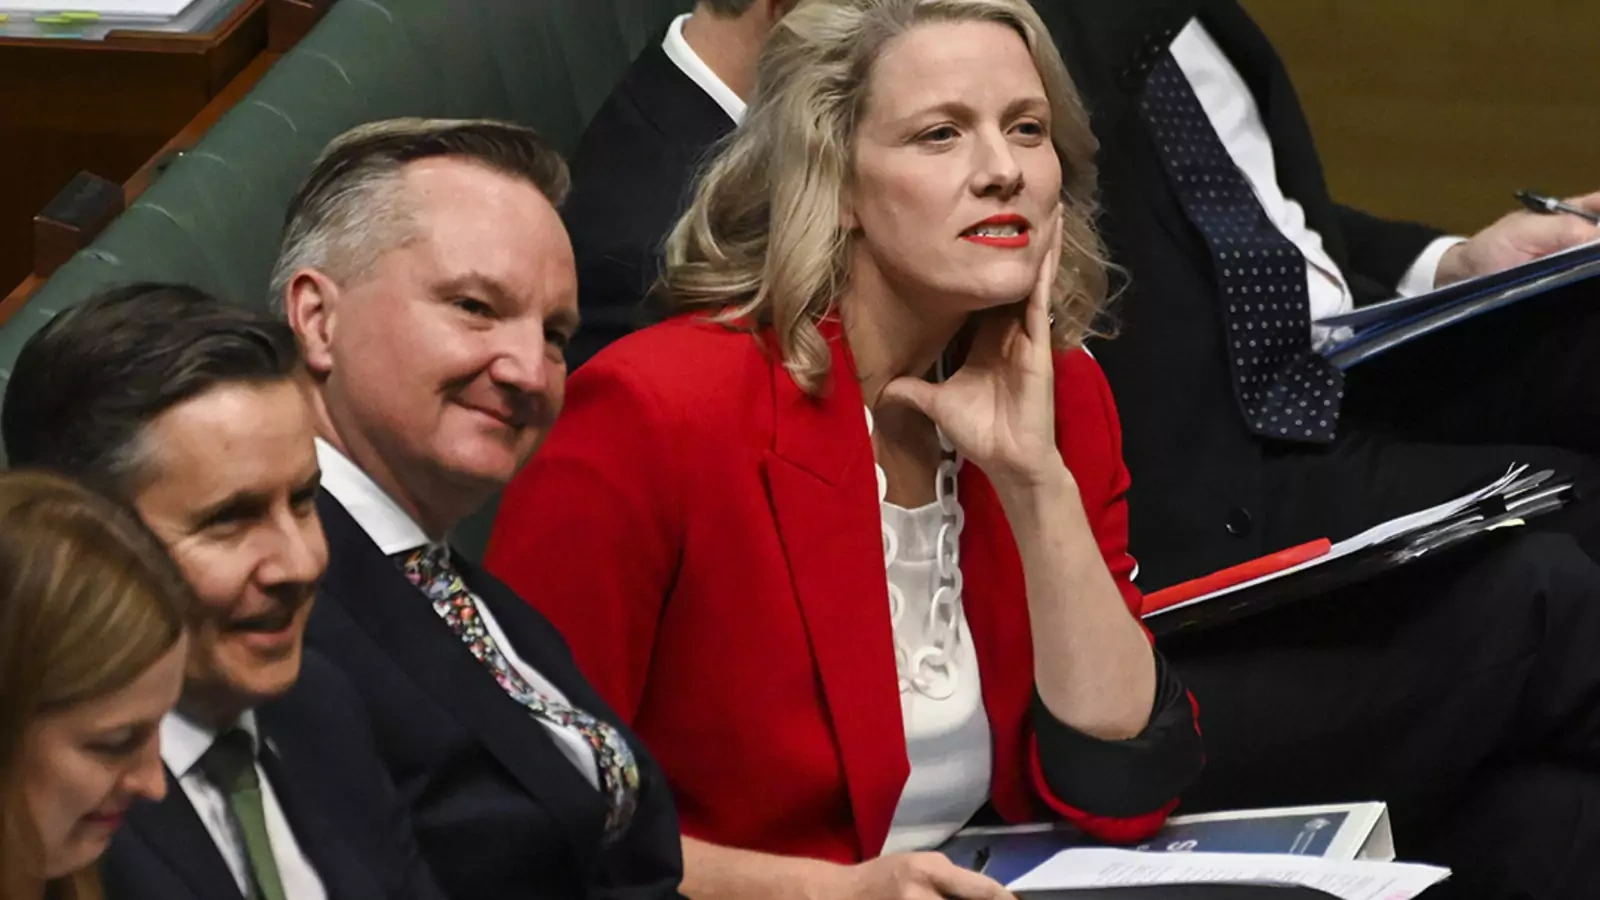  Home Affairs Minister Clare O’Neil during Question Time at Parliament House on February 14, 2023, in Canberra, Australia.